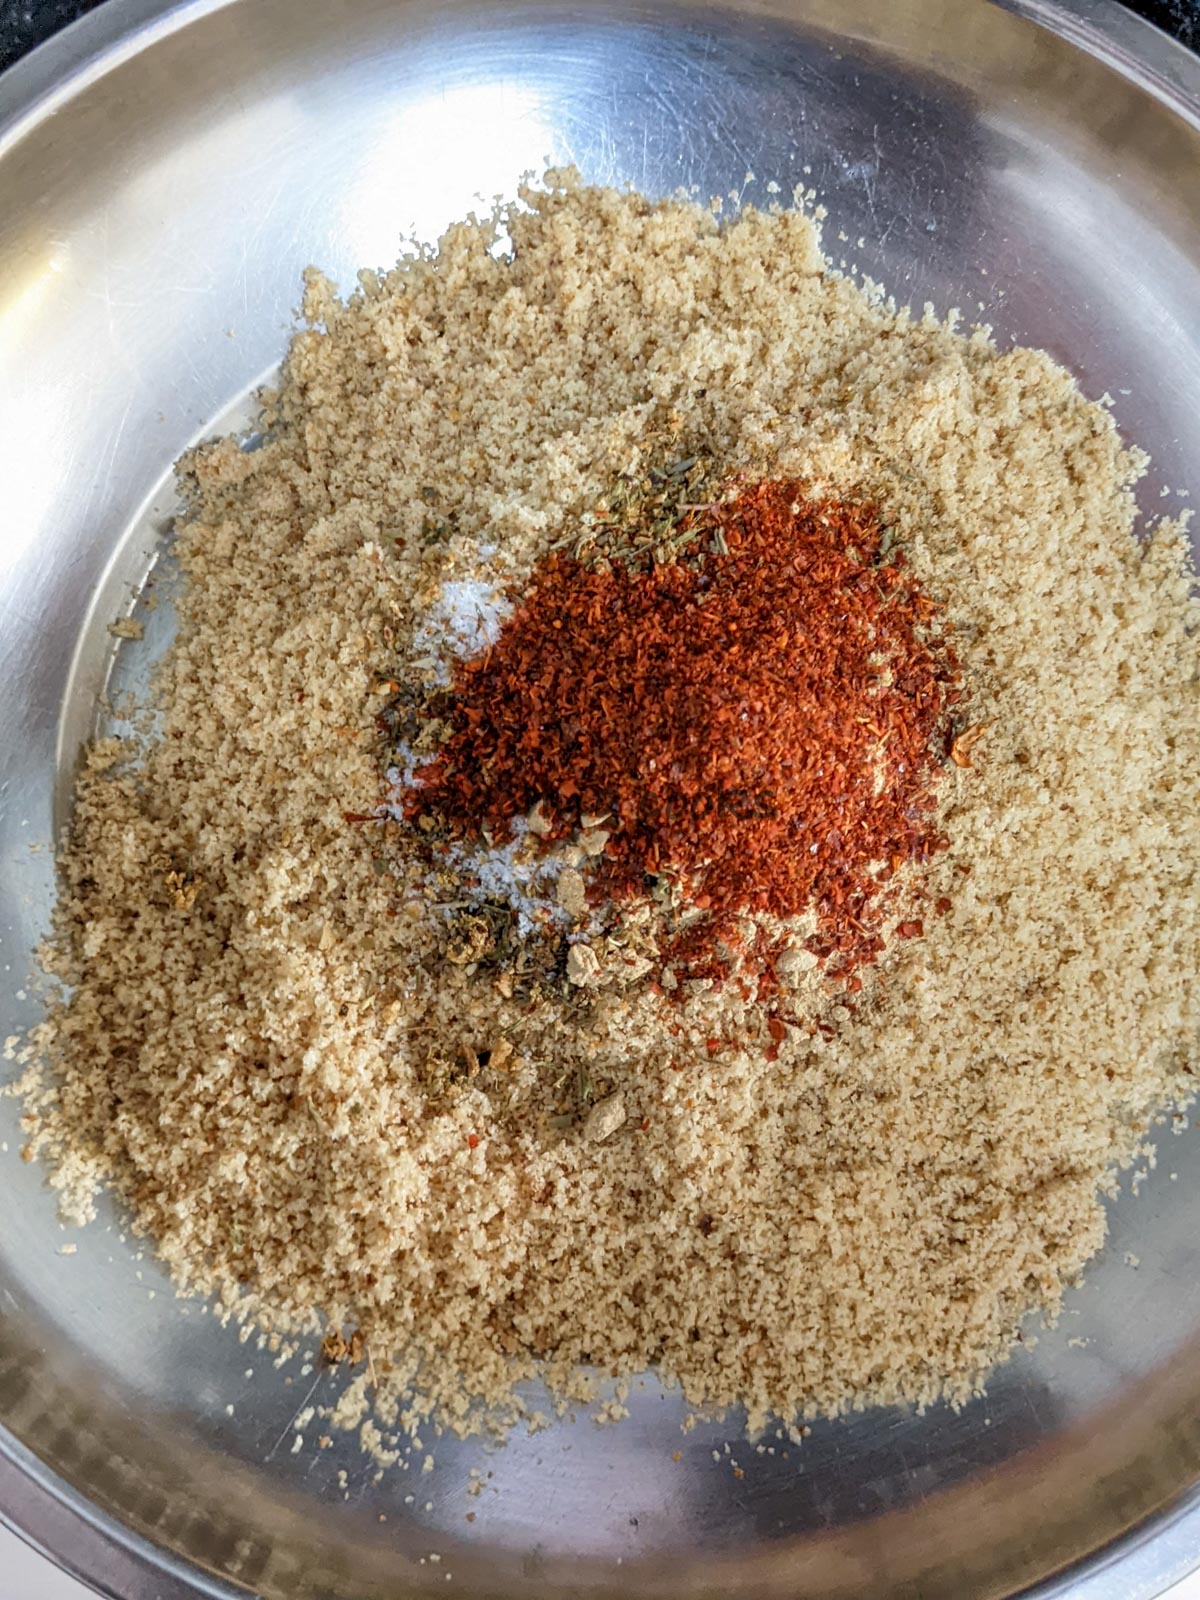 Breadcrumbs with seasonings and spices in a shallow bowl